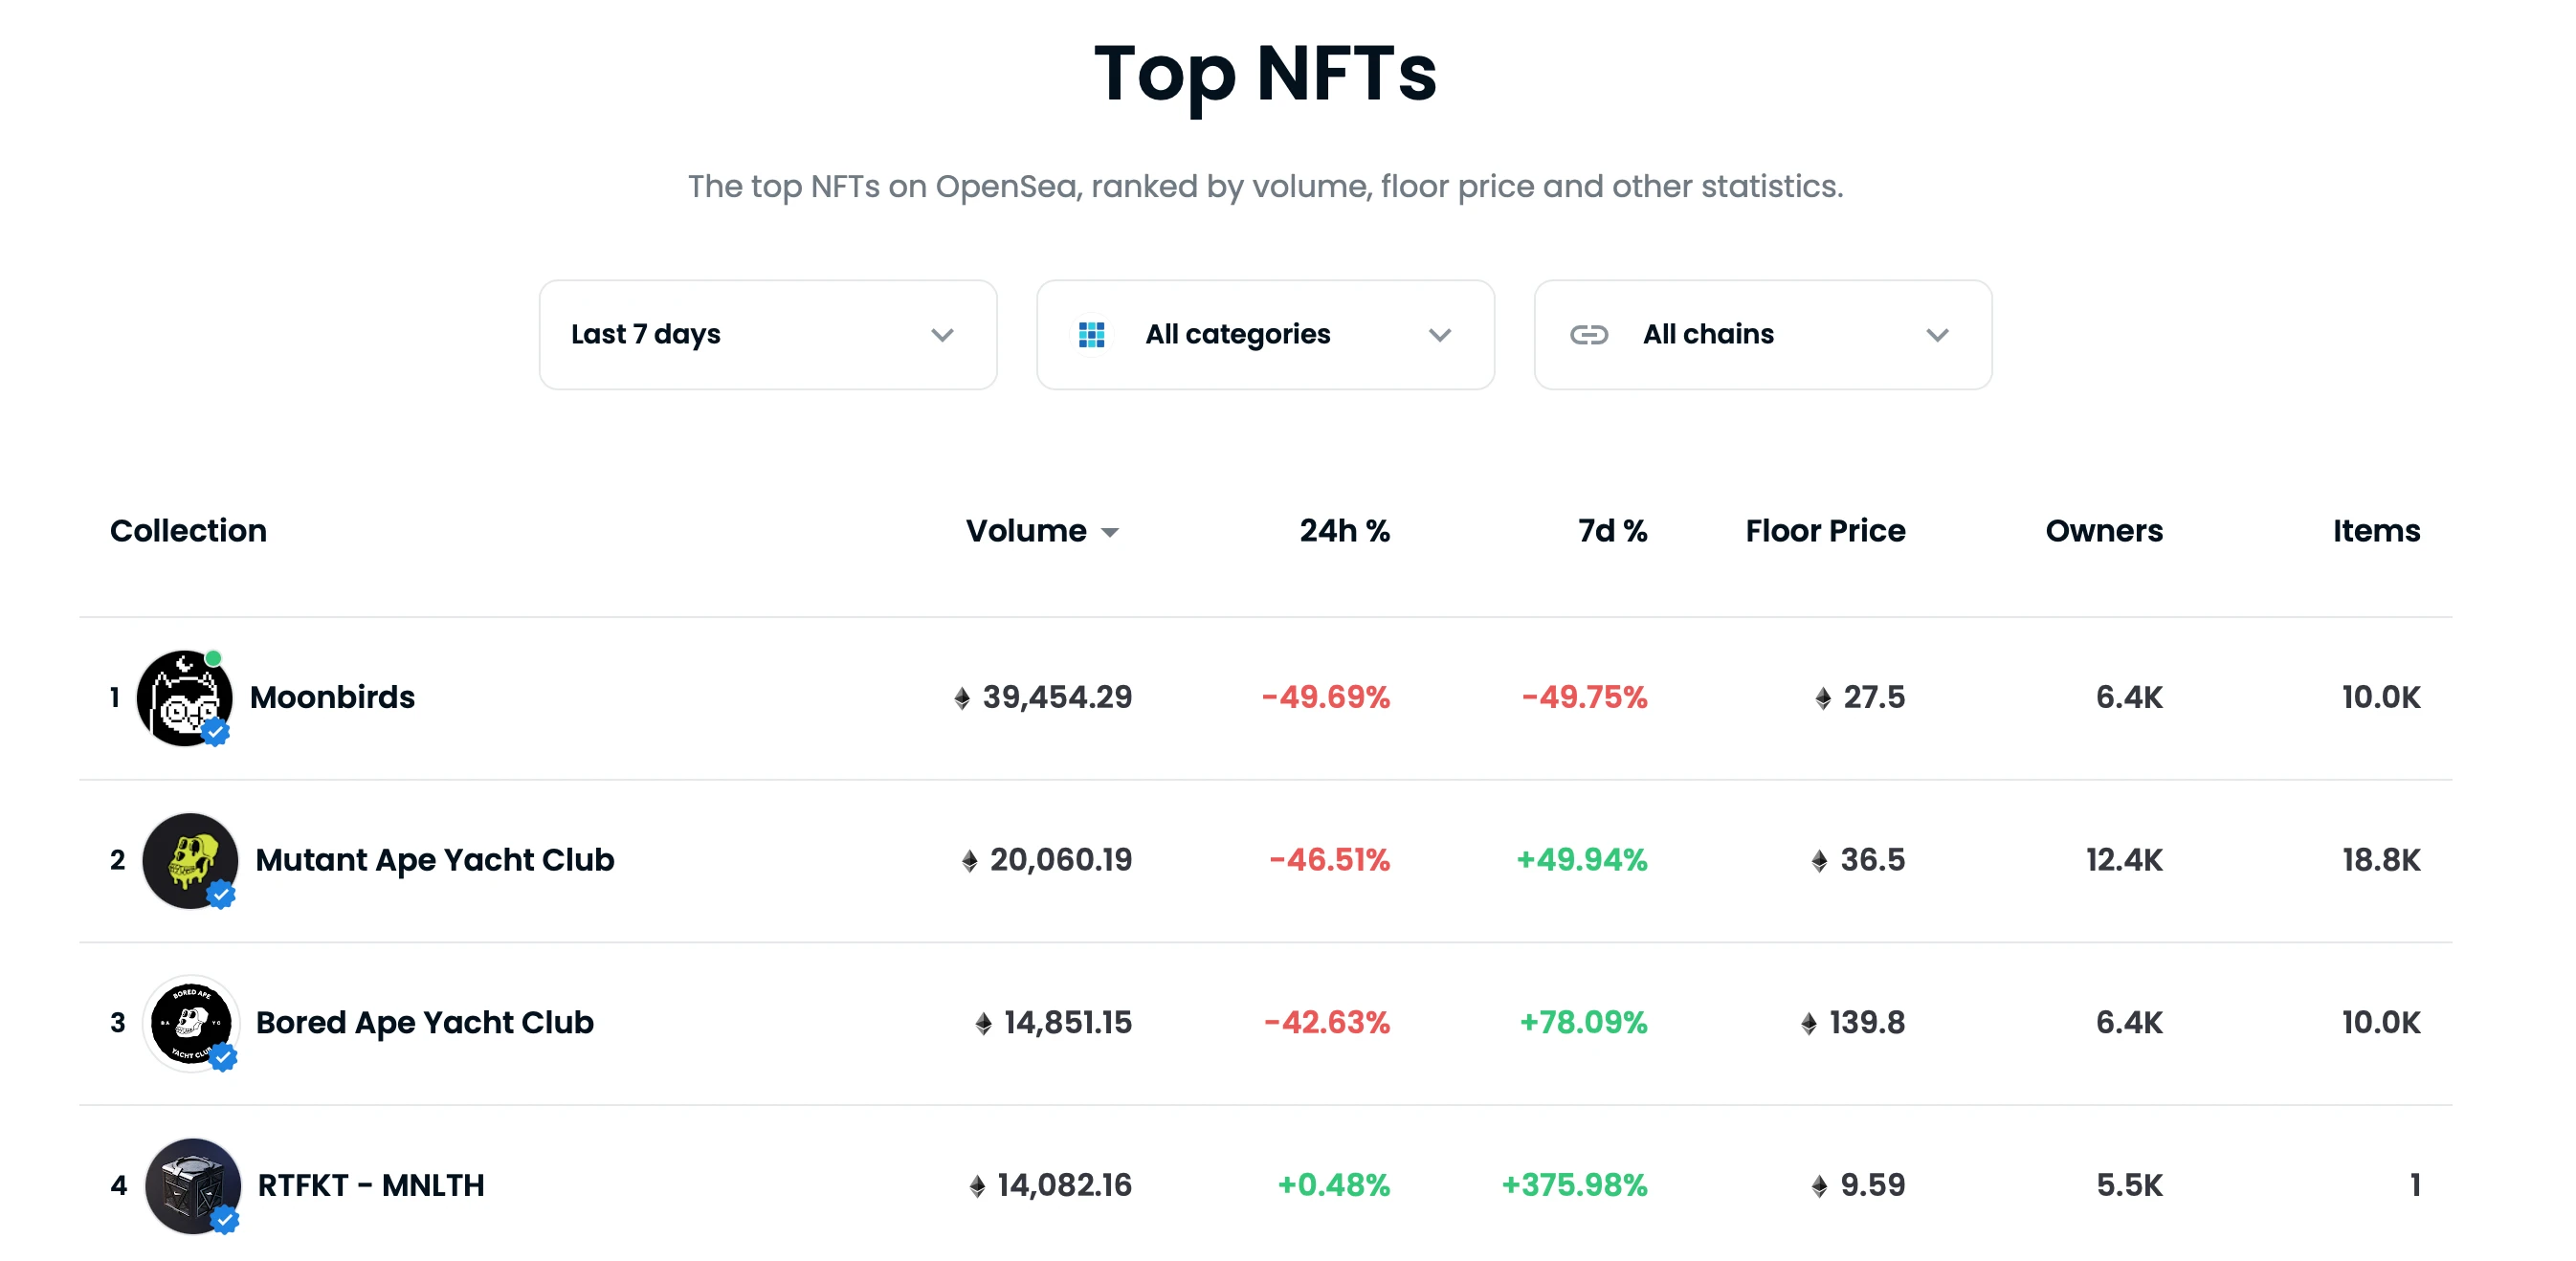 Top NFT collections in 7-day view on OpenSea.